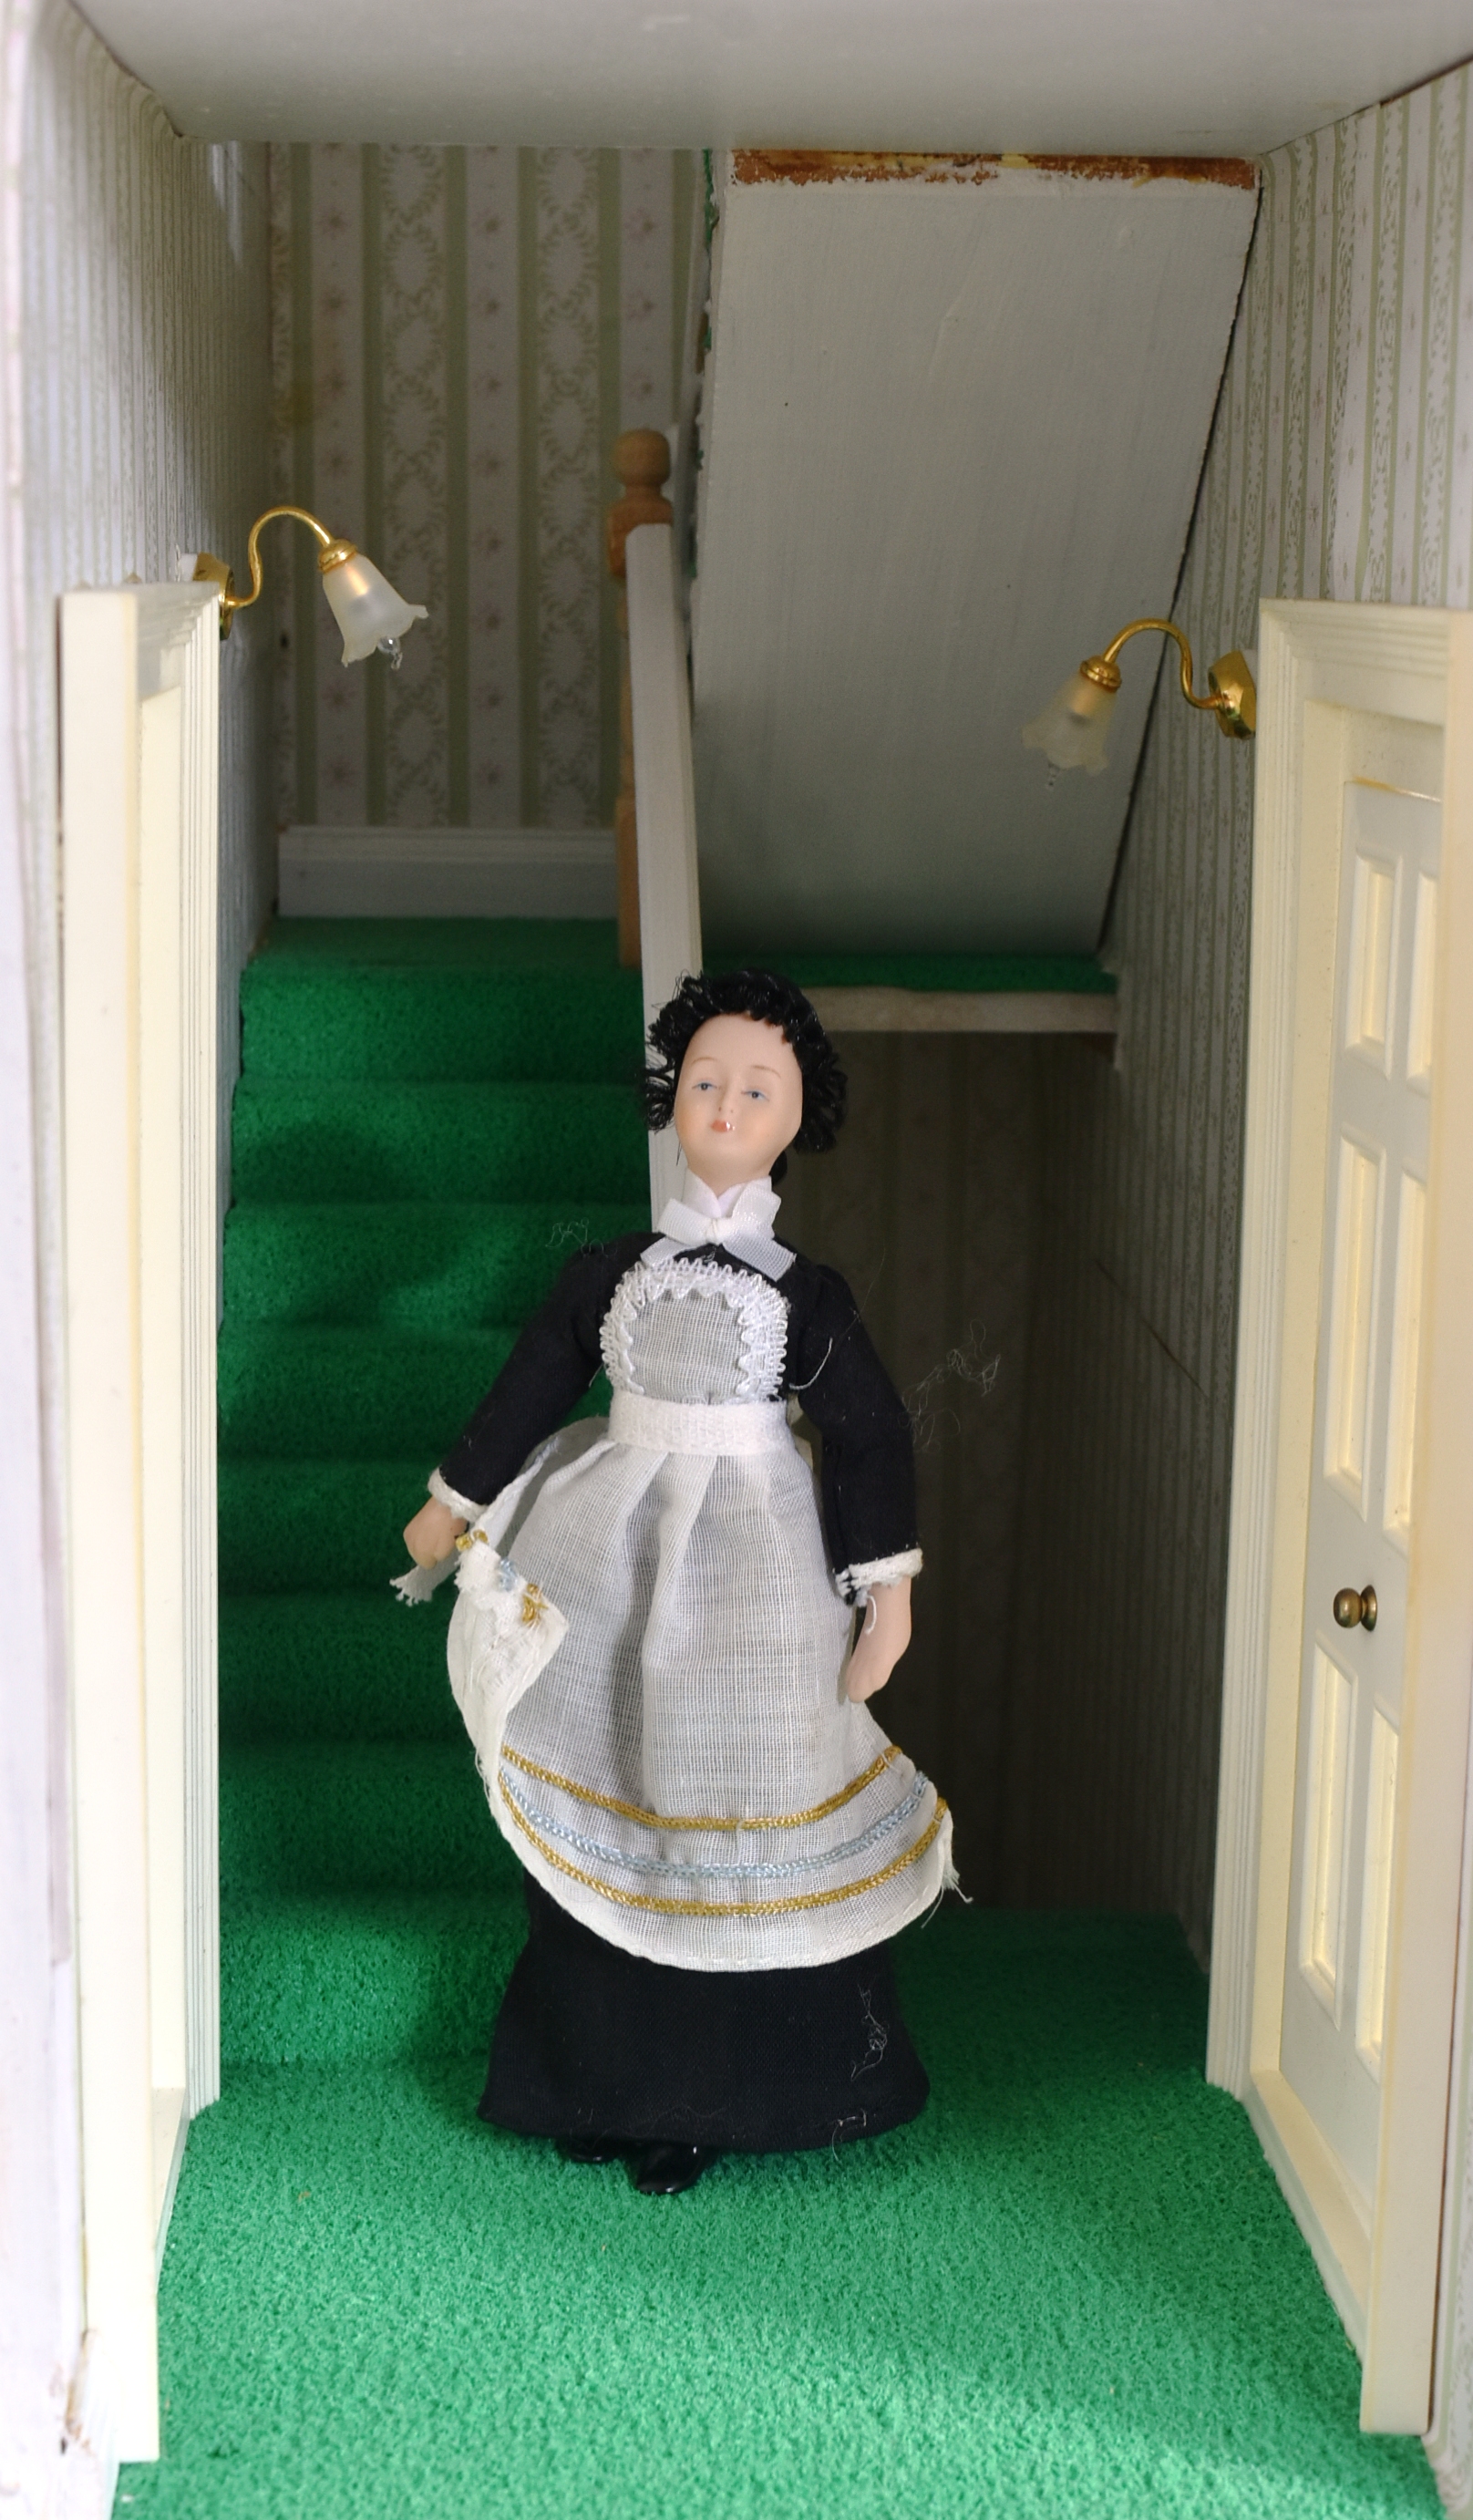 DOLL'S HOUSE - LARGE FOUR STOREY VICTORIAN TOWN HOUSE - Image 9 of 11